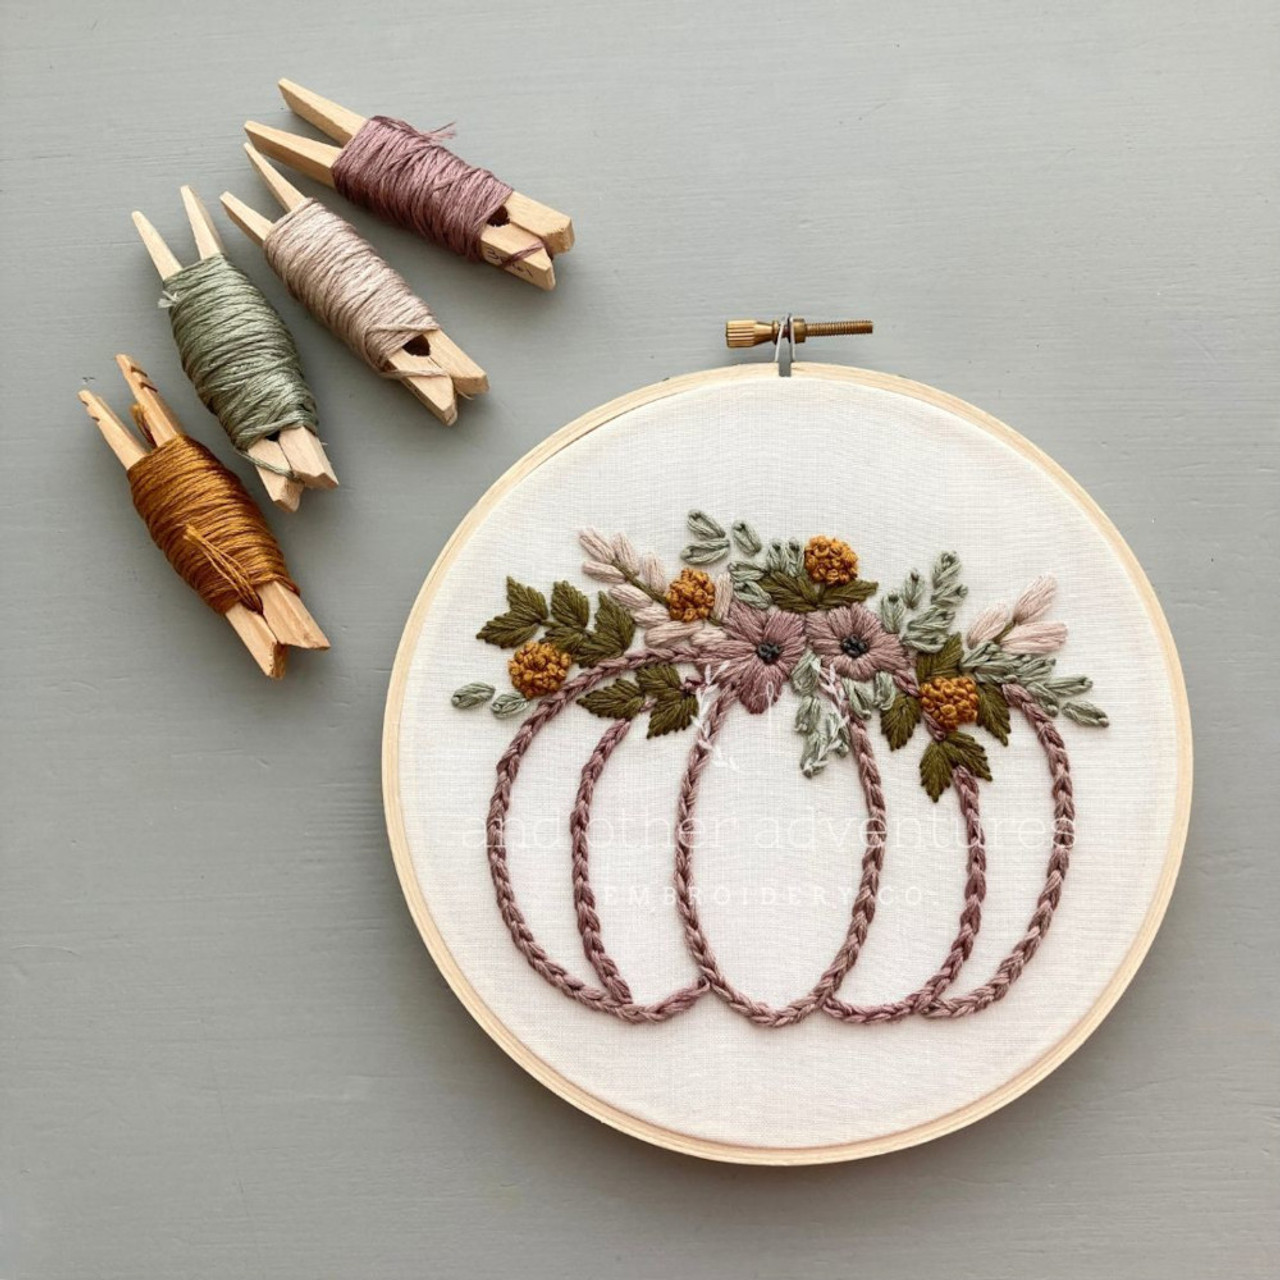 And Other Adventures Embroidery Co Embroidery Kit Smokey Purple Pumpkin ( Beginner) - The Websters